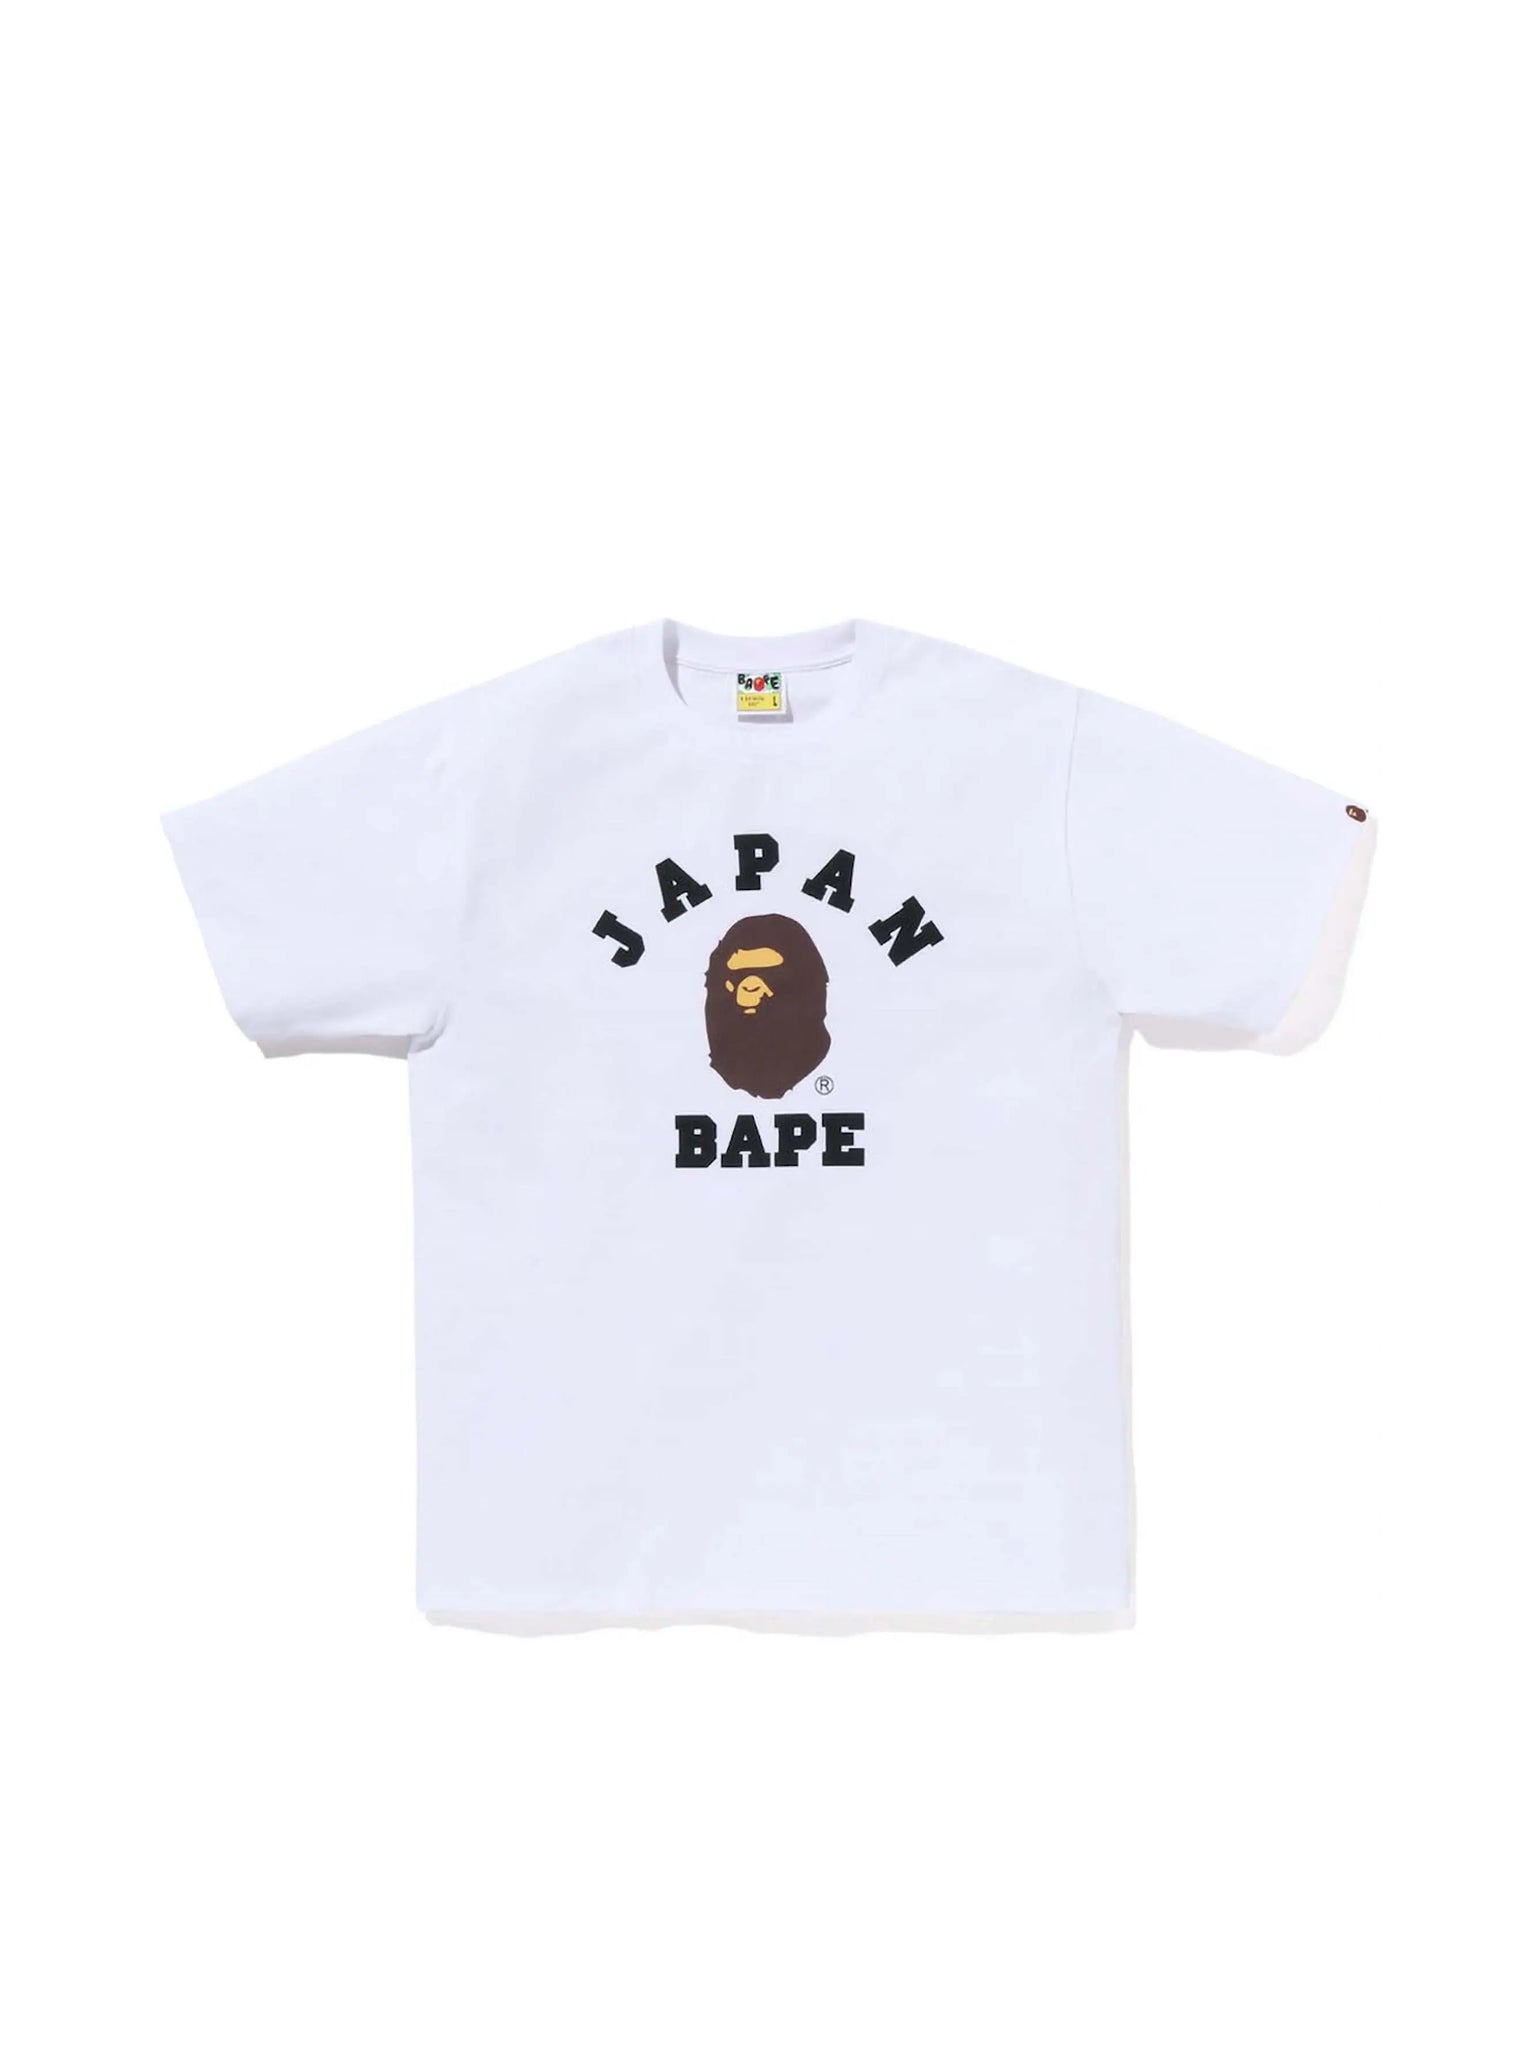 A Bathing Ape BAPE Japan College City Tee White in Auckland, New Zealand - Shop name